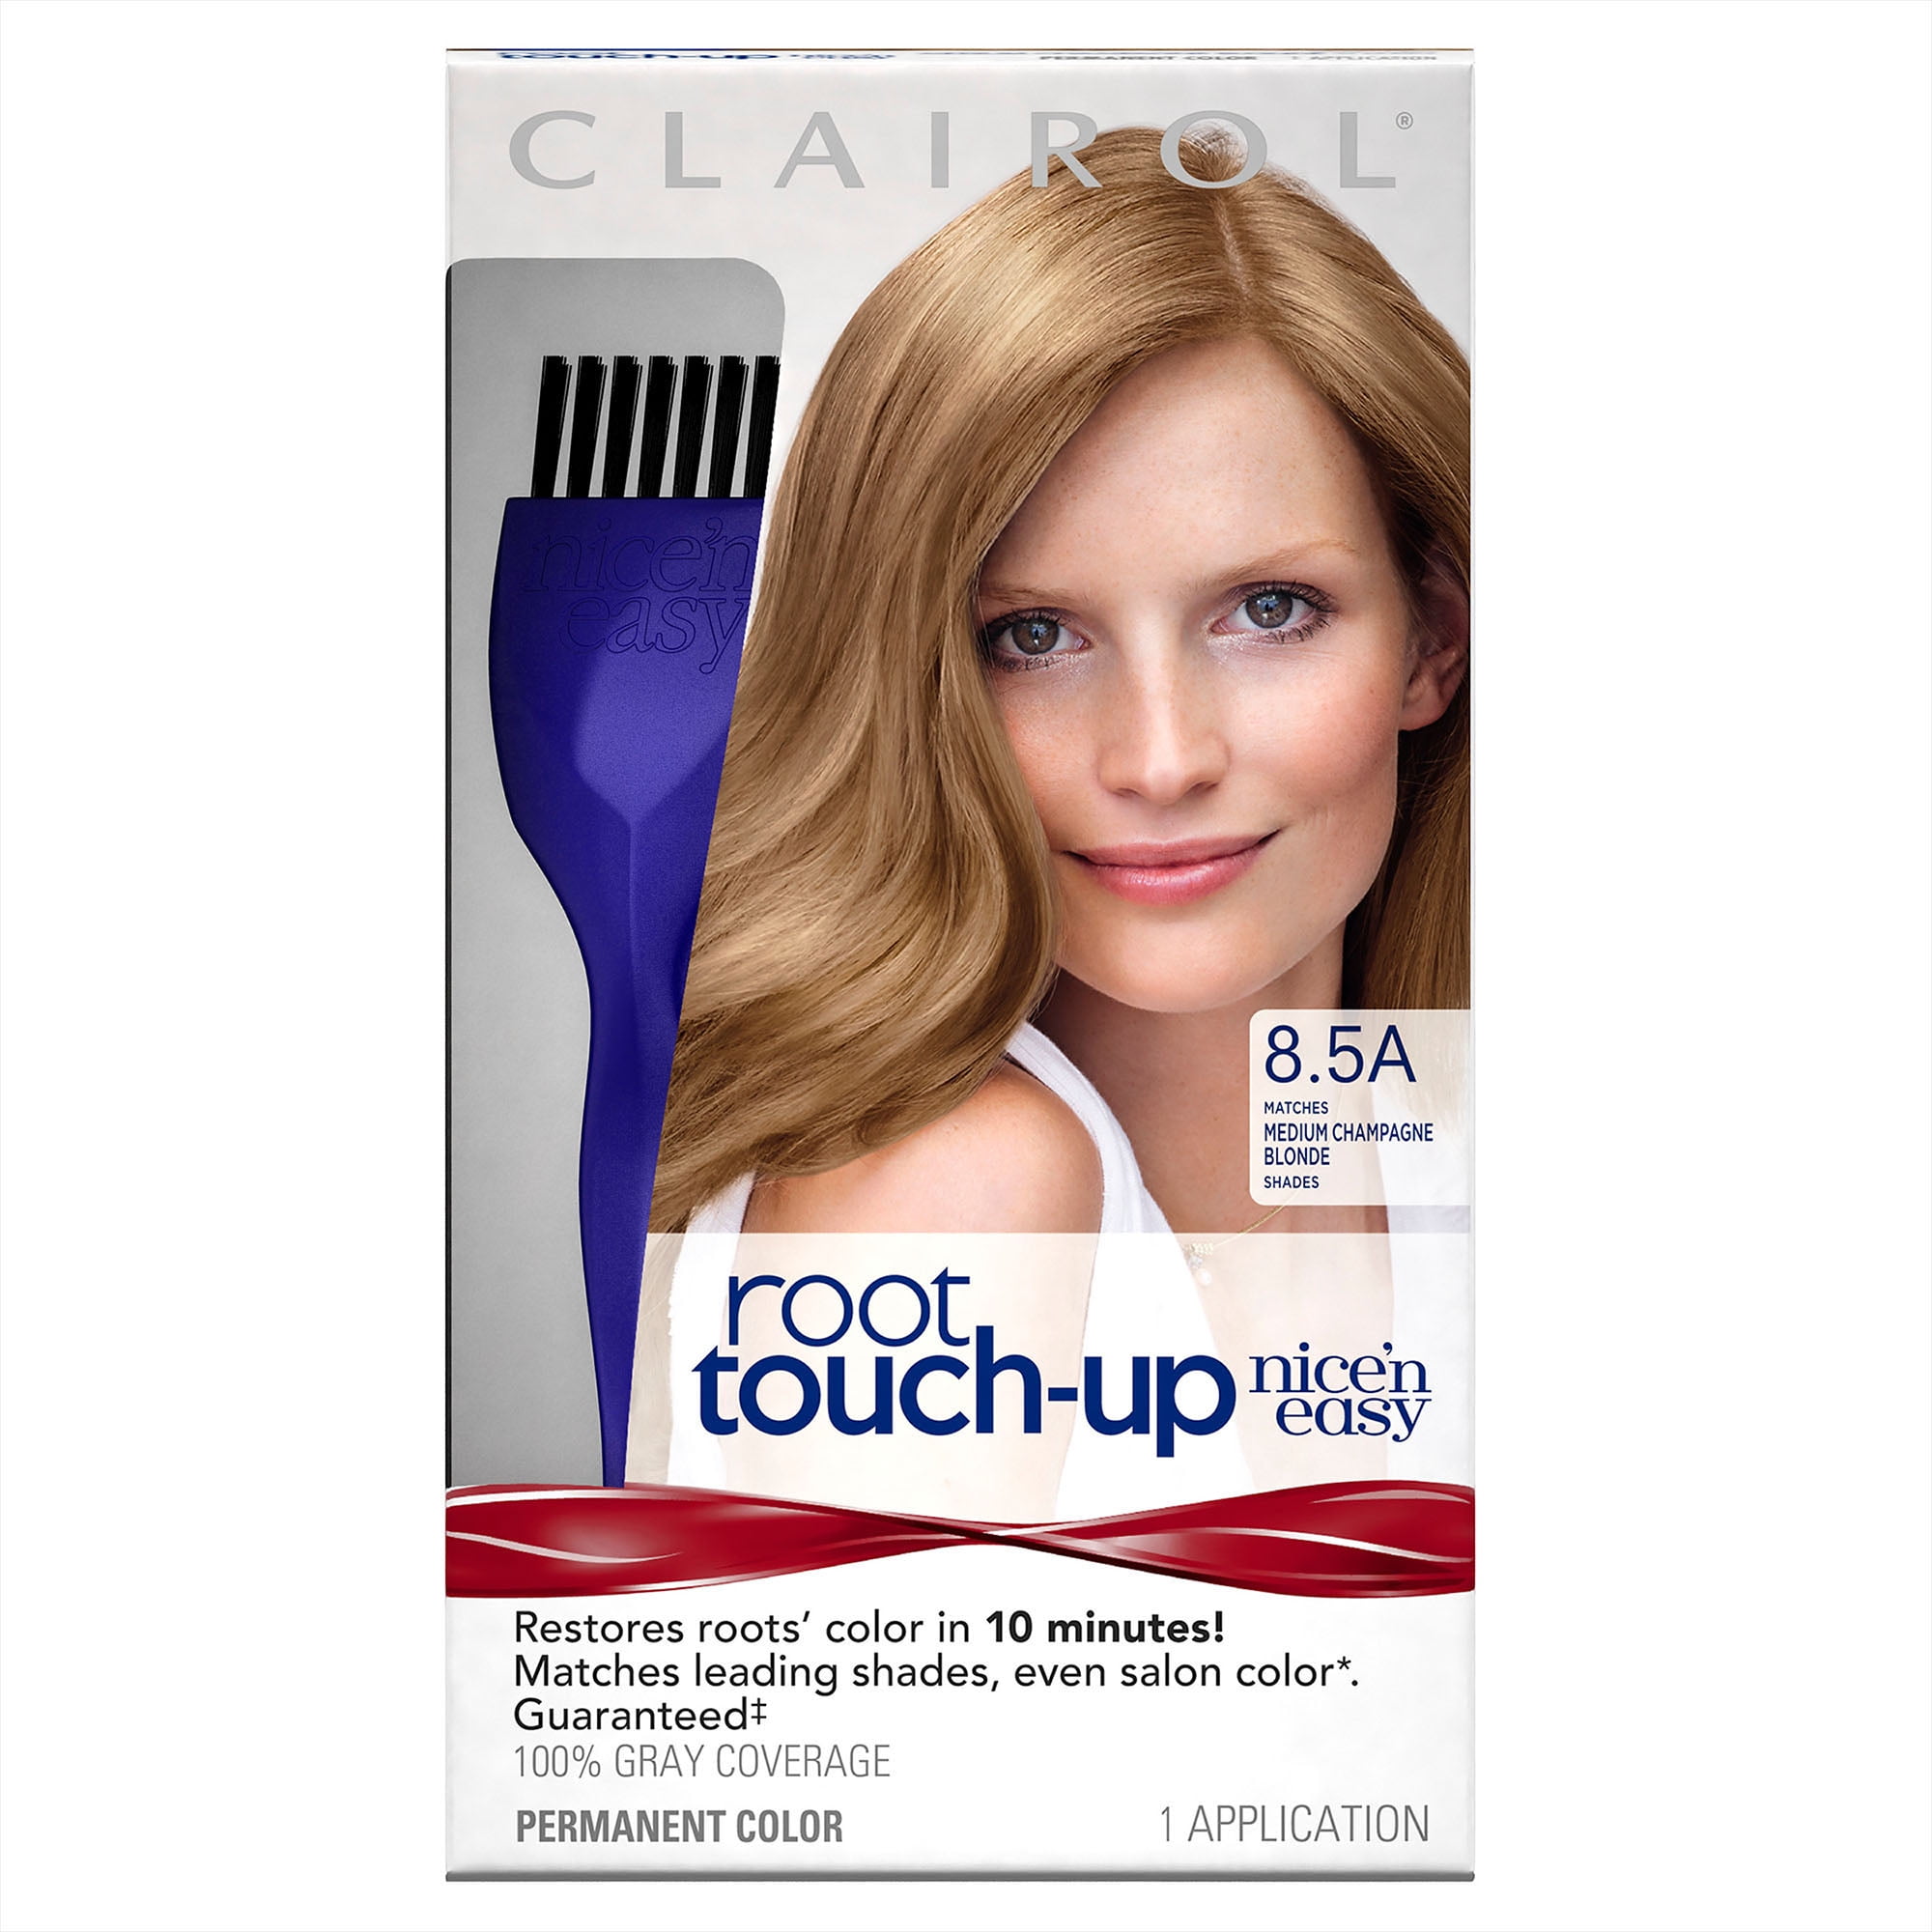 Clairol Nice'n Easy Root Touch-Up, 8.5A Medium Champagne Blonde, Perma...